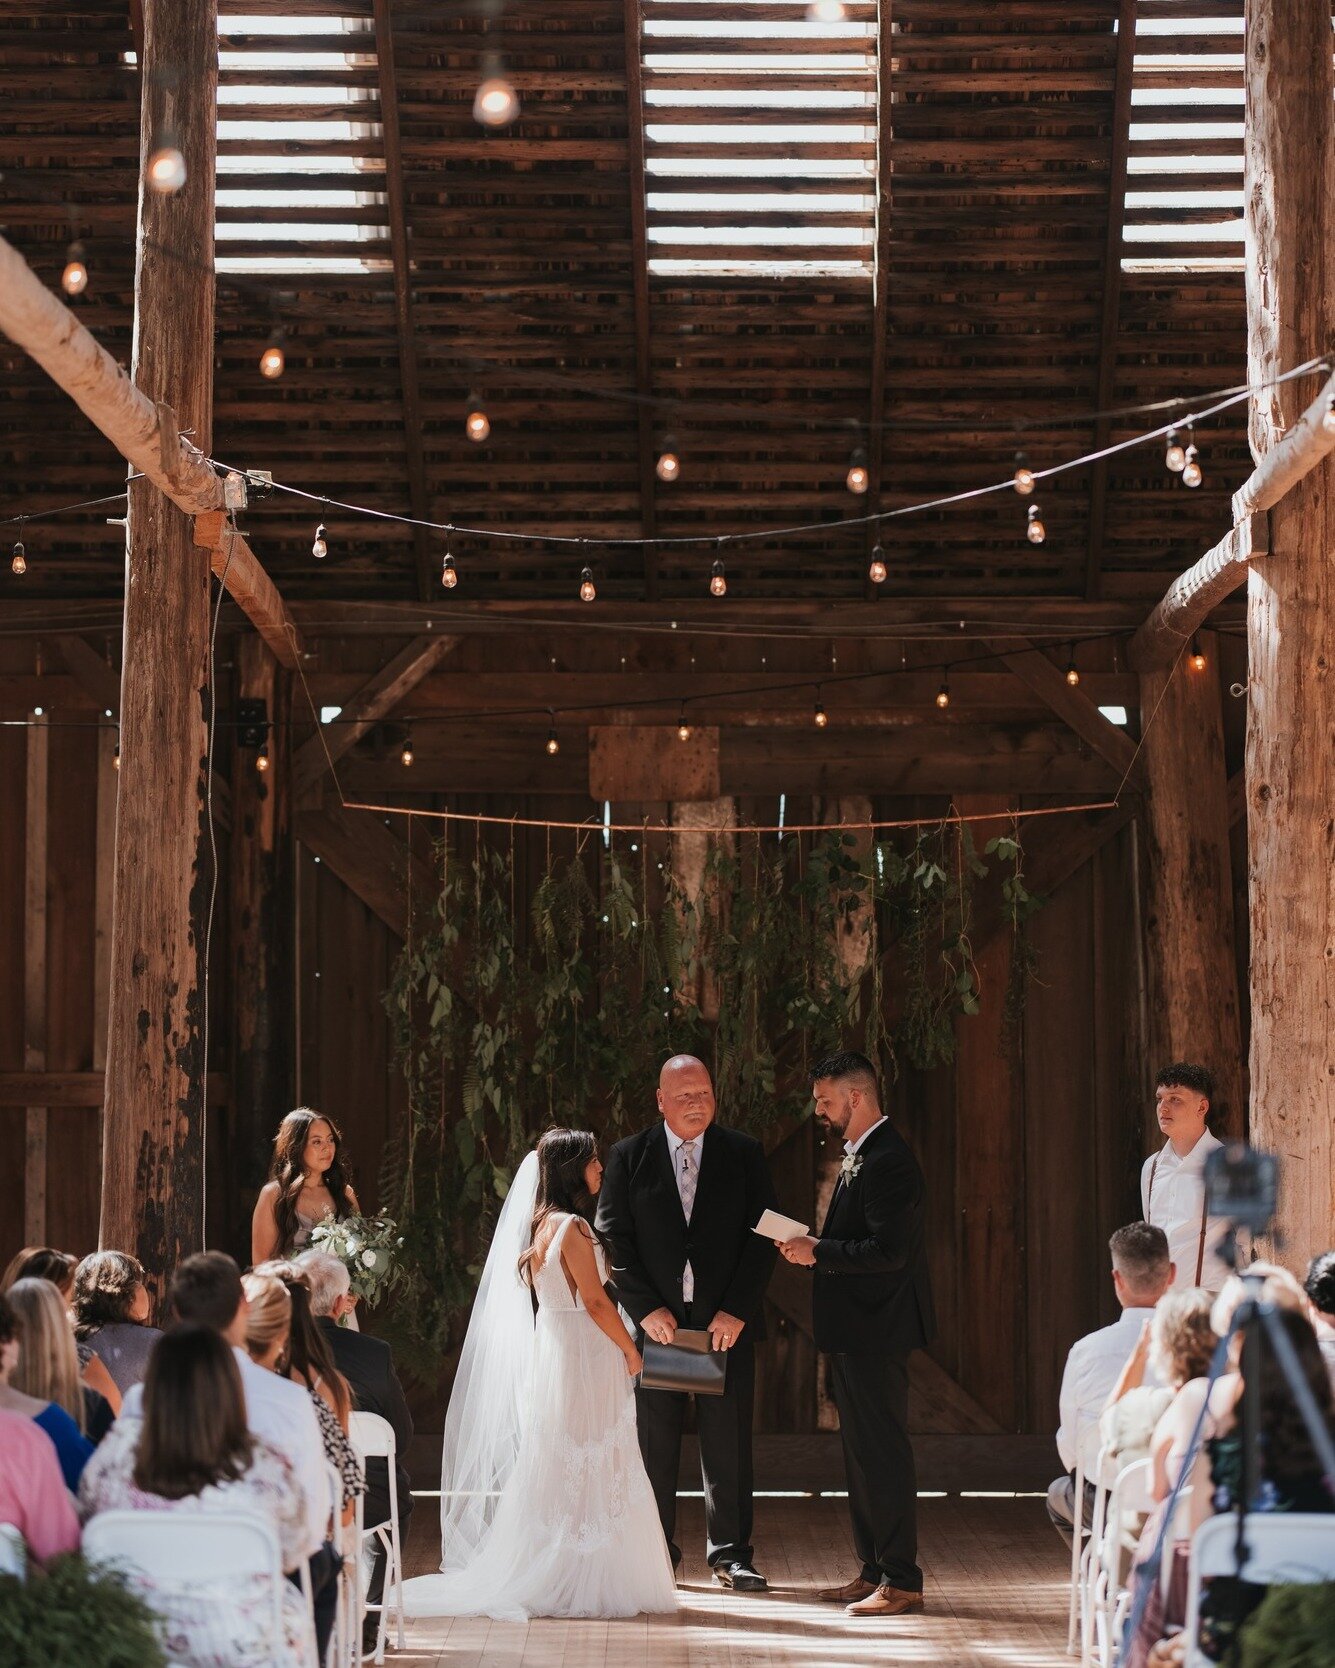 One more week to receive 10% off! Book your 2023 event by April 15th to get in on the deal! 
Email info@duckenfarm.com or go to www.duckenfarm.com for more information, schedule a tour or to book your event.

The Ducken Farm is a charming barn venue 